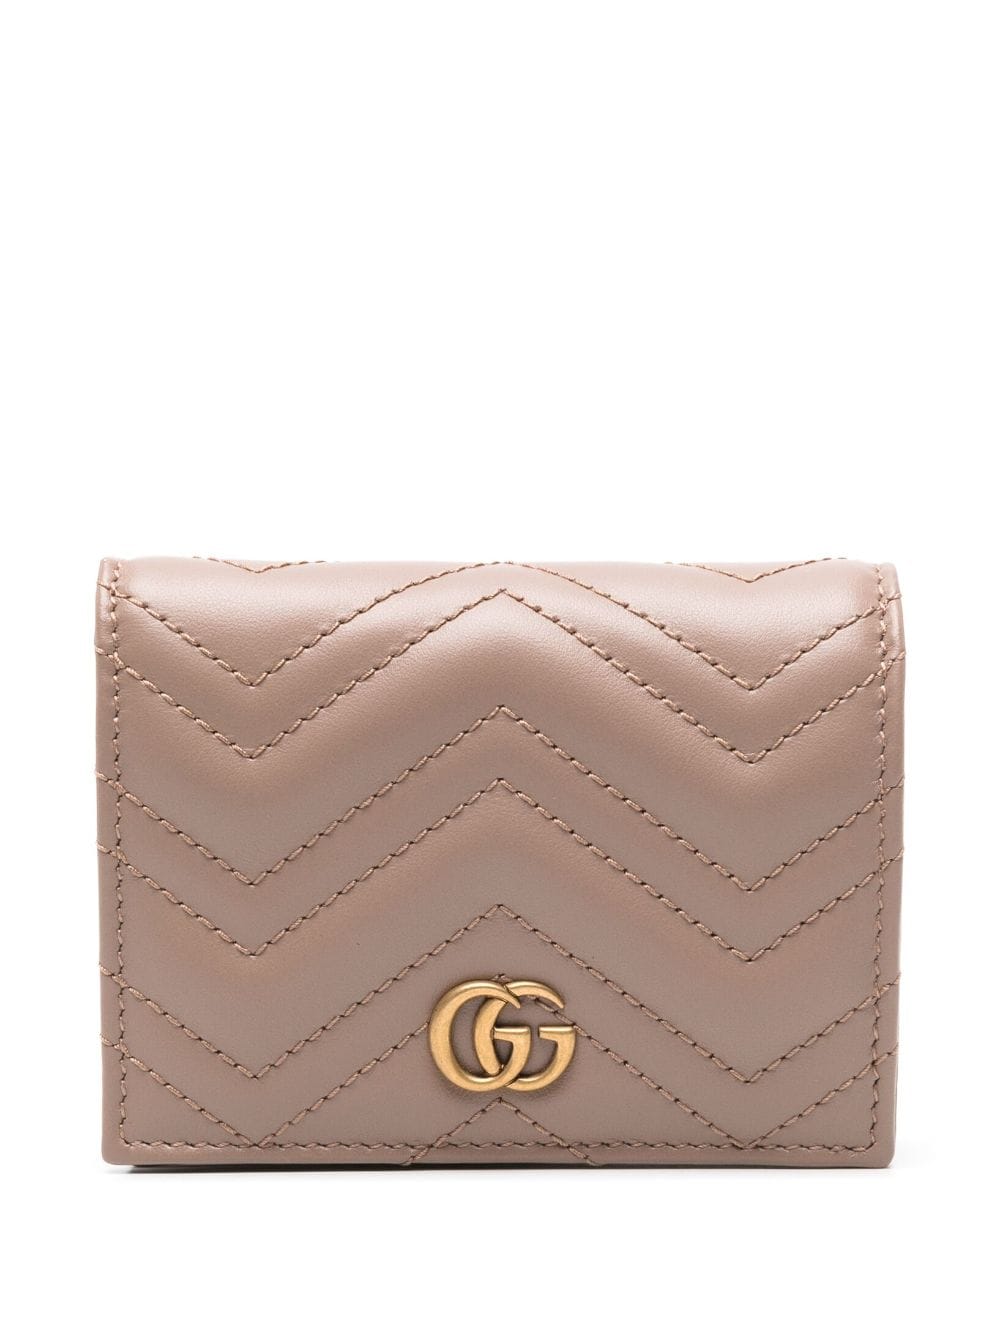 Image 1 of Gucci GG Marmont leather wallet